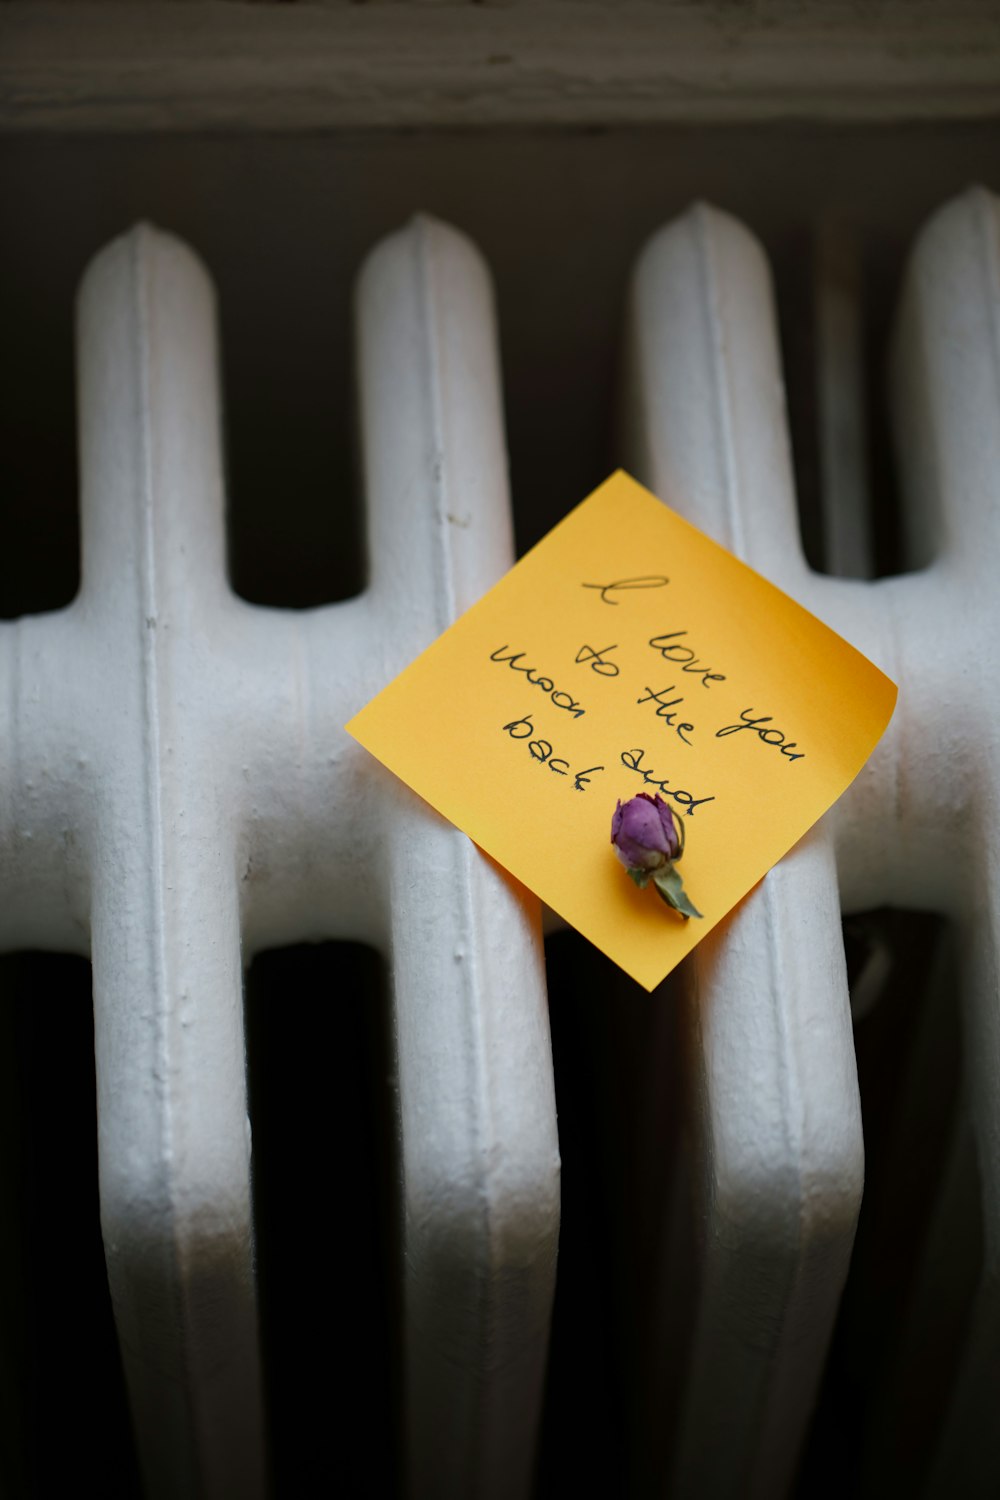 a yellow post it note attached to a radiator